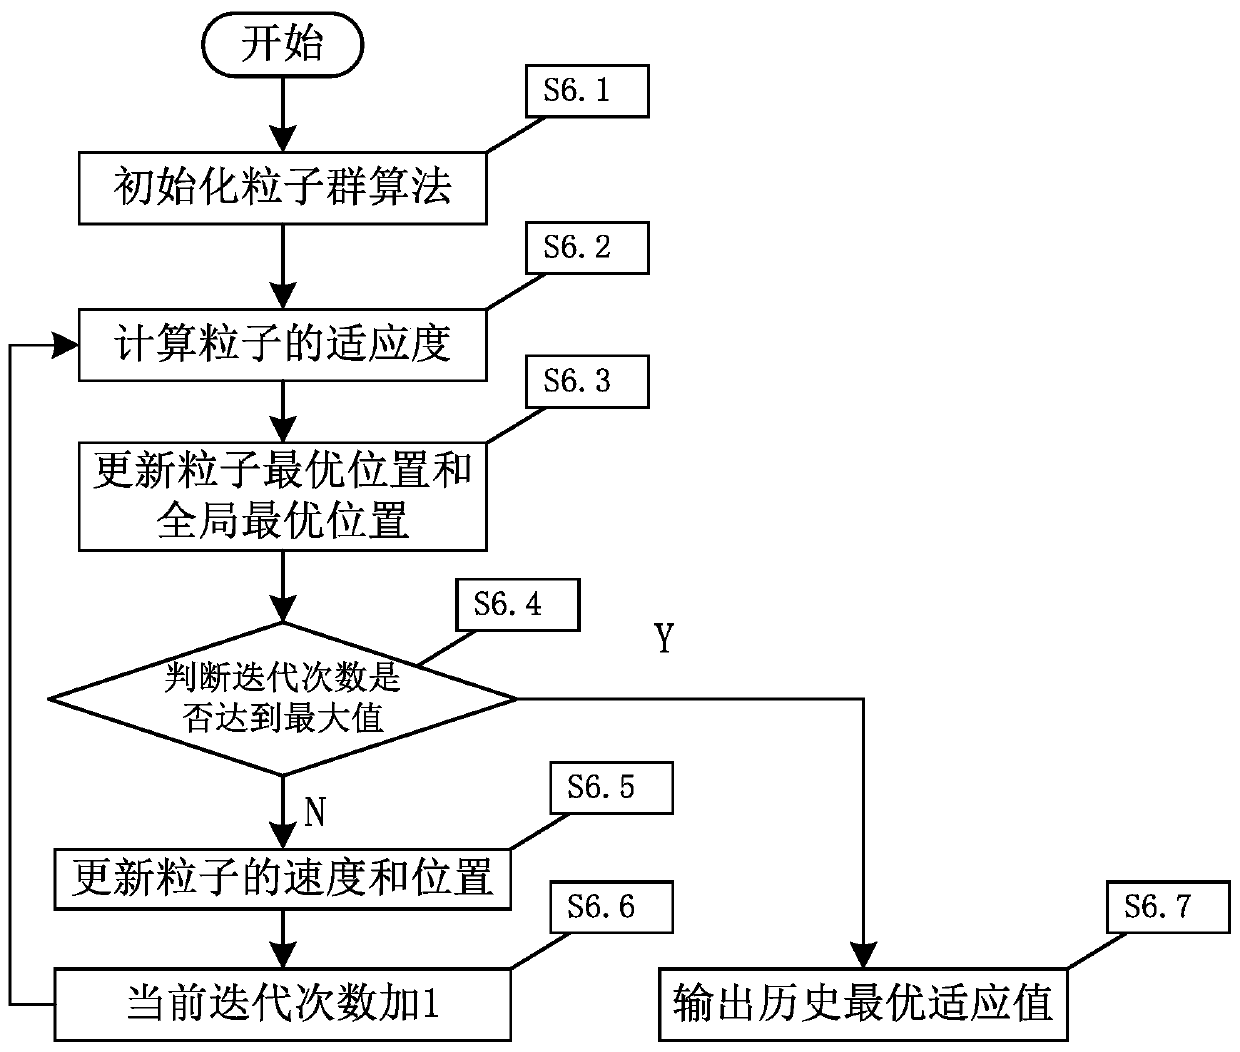 Hybrid cable connection method considering reliable wind power plant current collection system